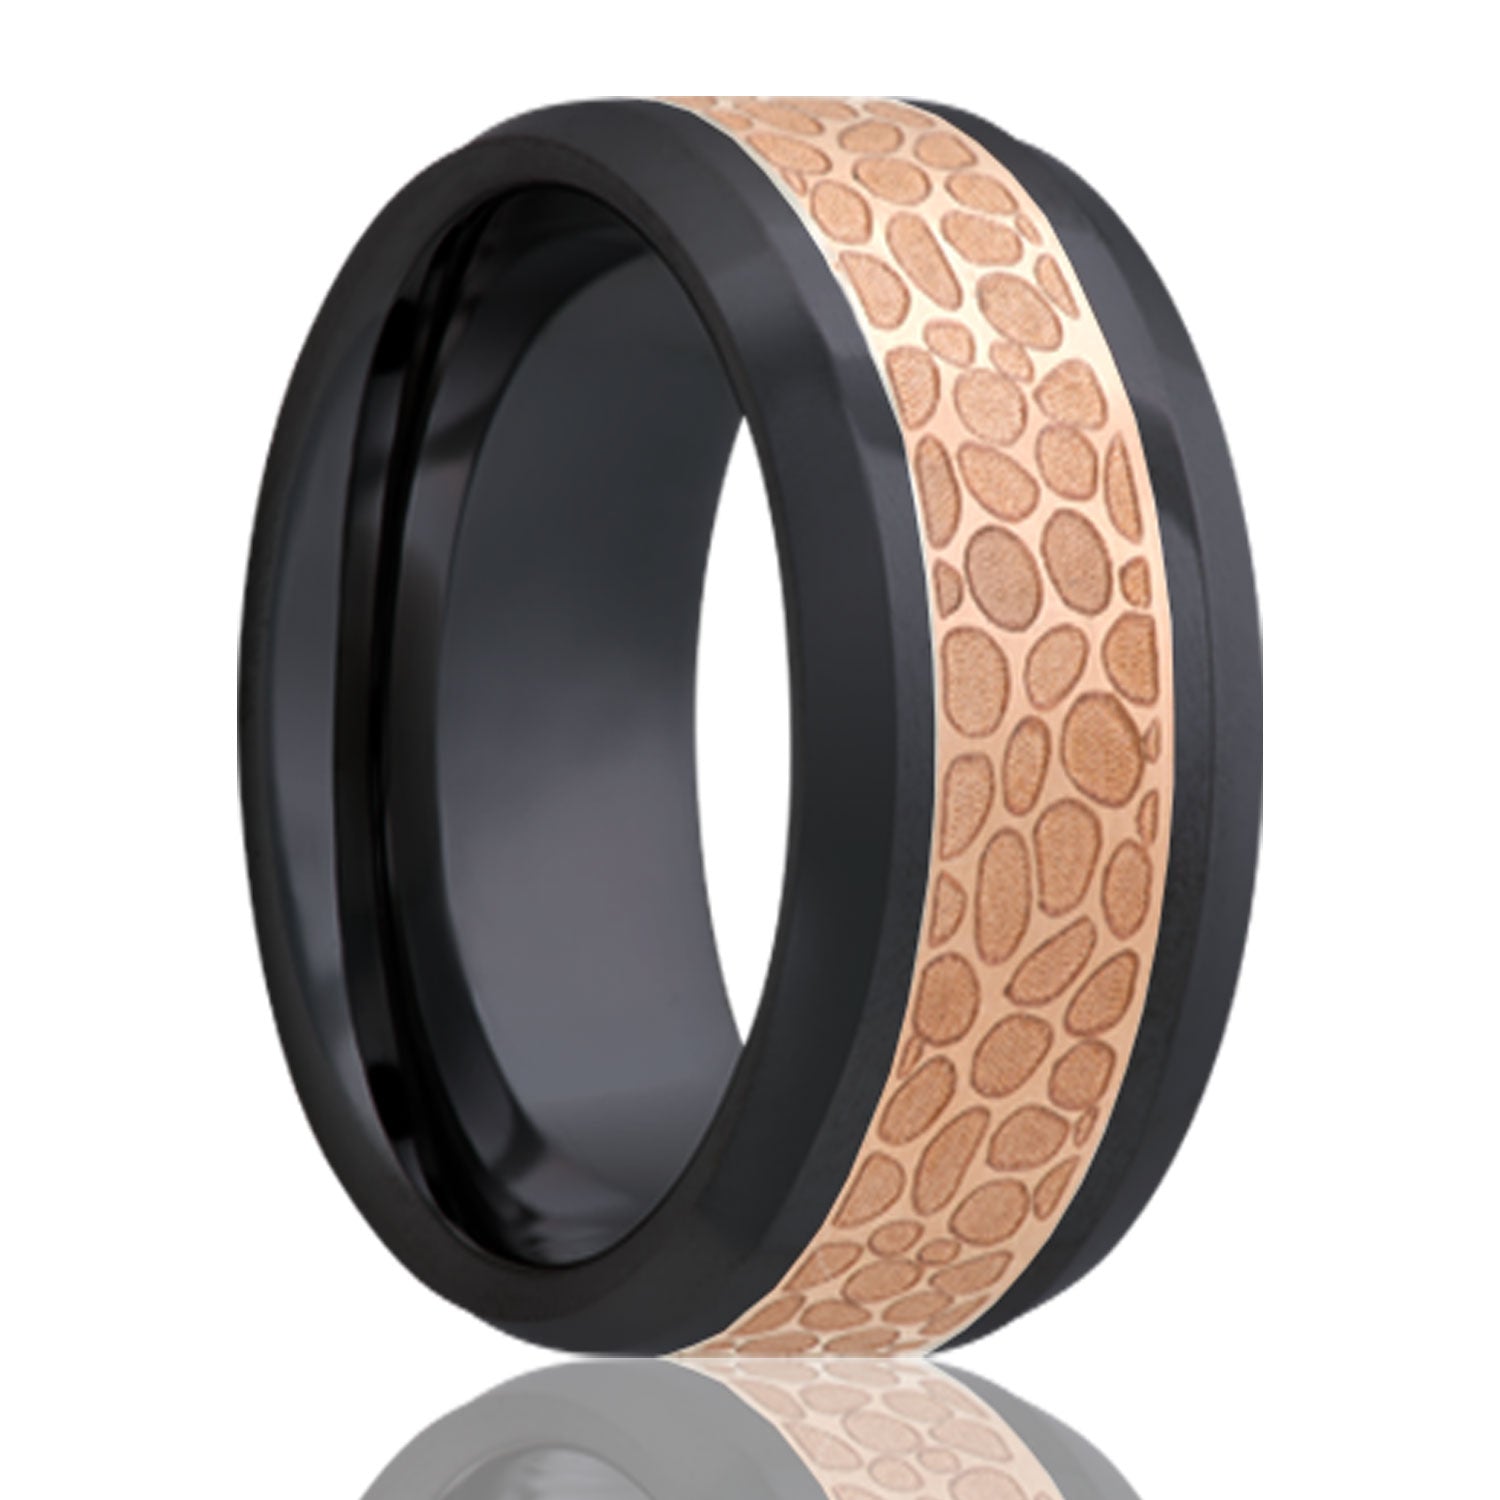 A copper inlay zirconium wedding band with beveled edges displayed on a neutral white background.